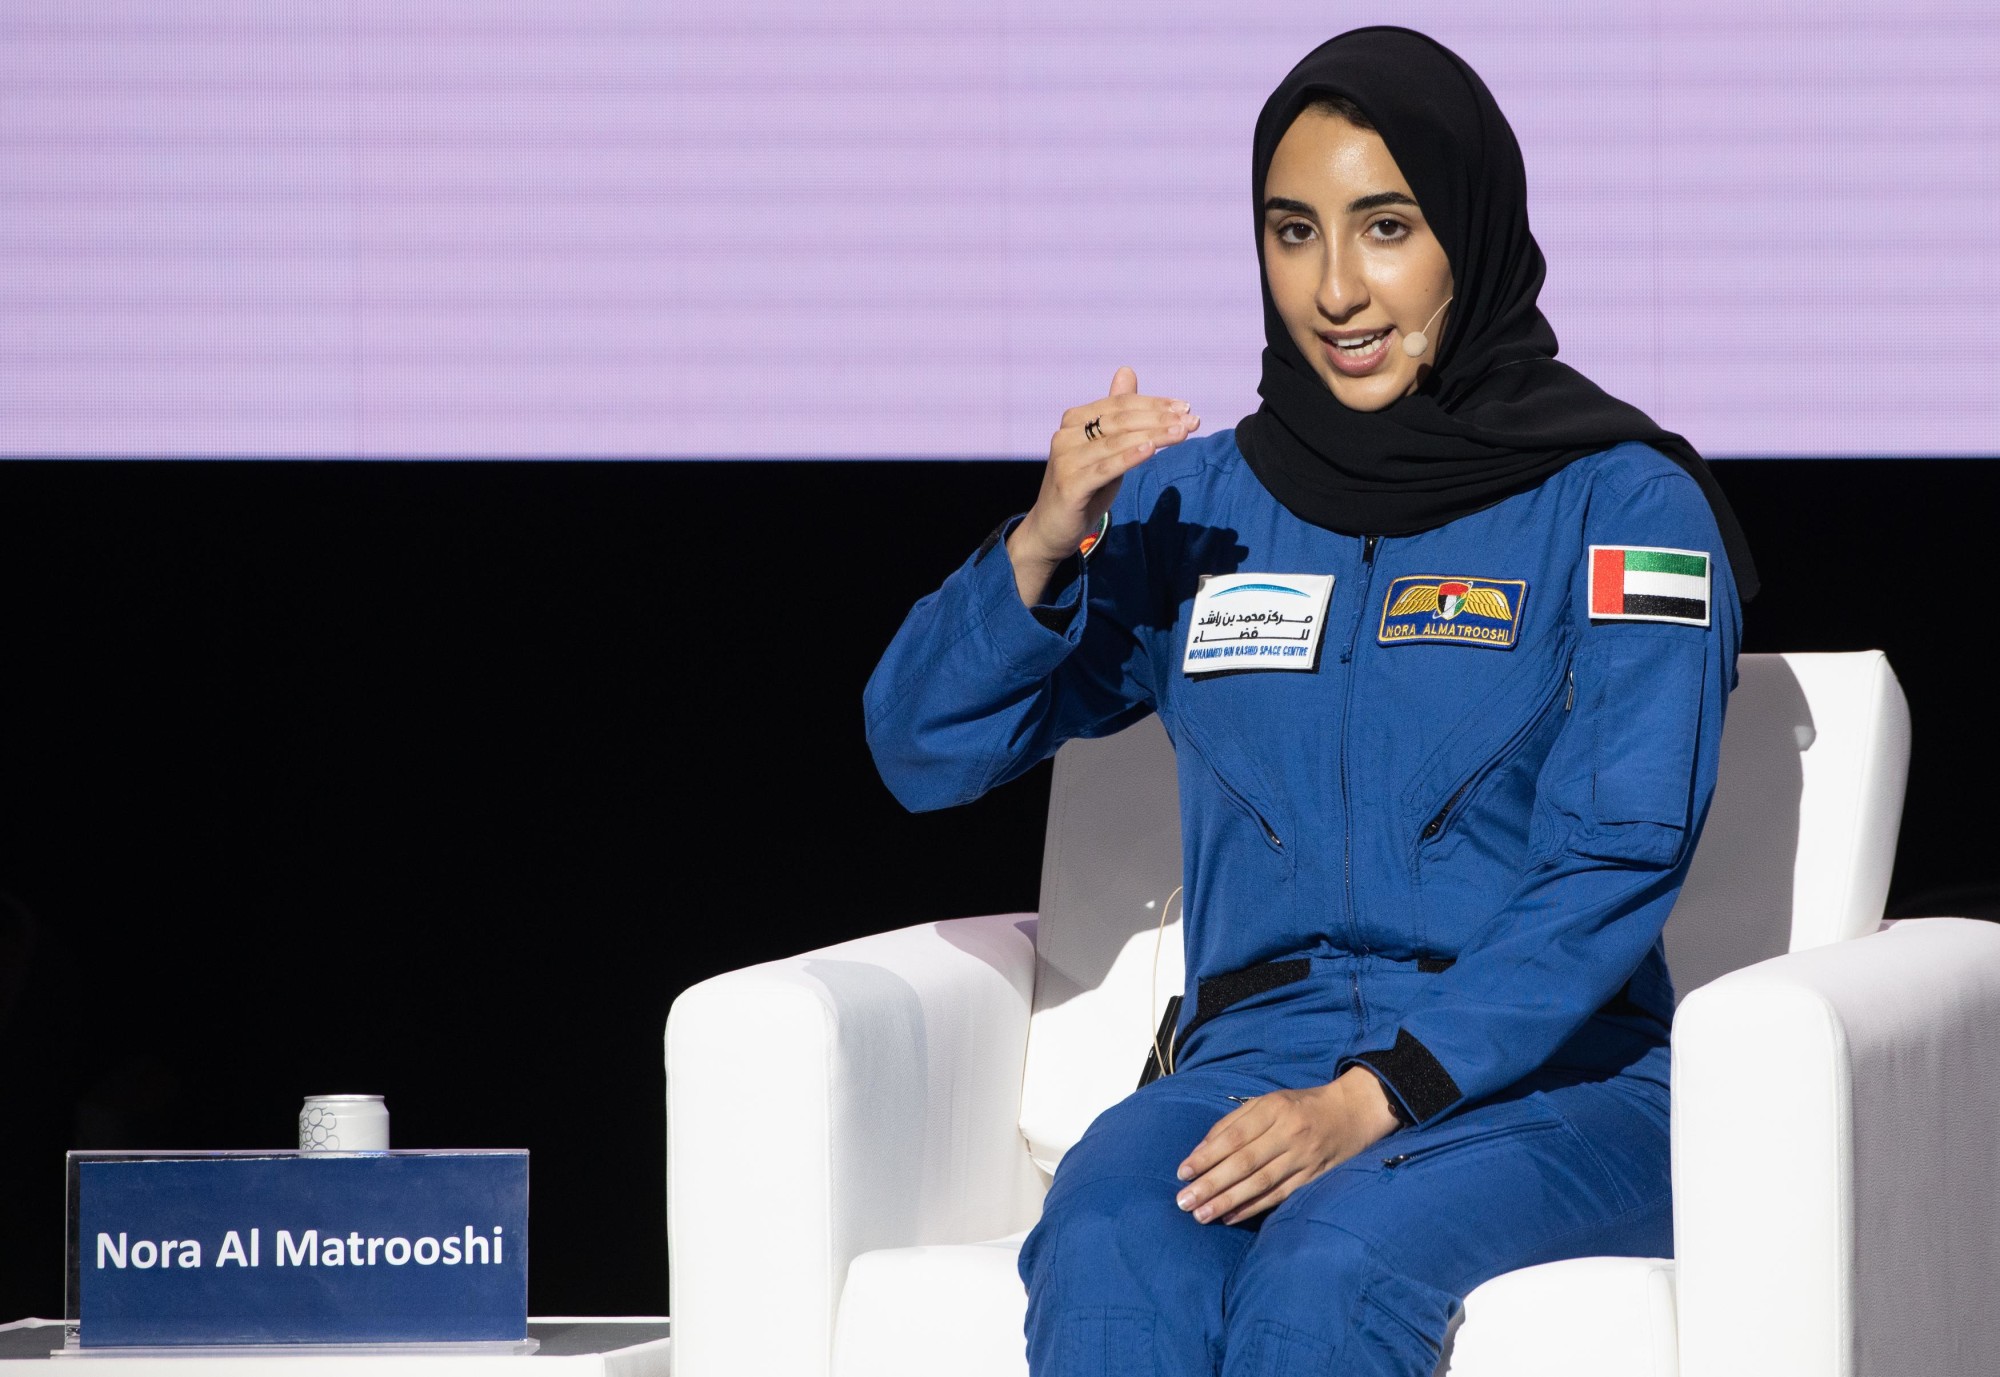 Nora Al Matrooshi speaks during the ‘Ask An Astronaut’ Q&amp;A as part of The People’s Mission Citizens in Space Exploration Web Image m4624